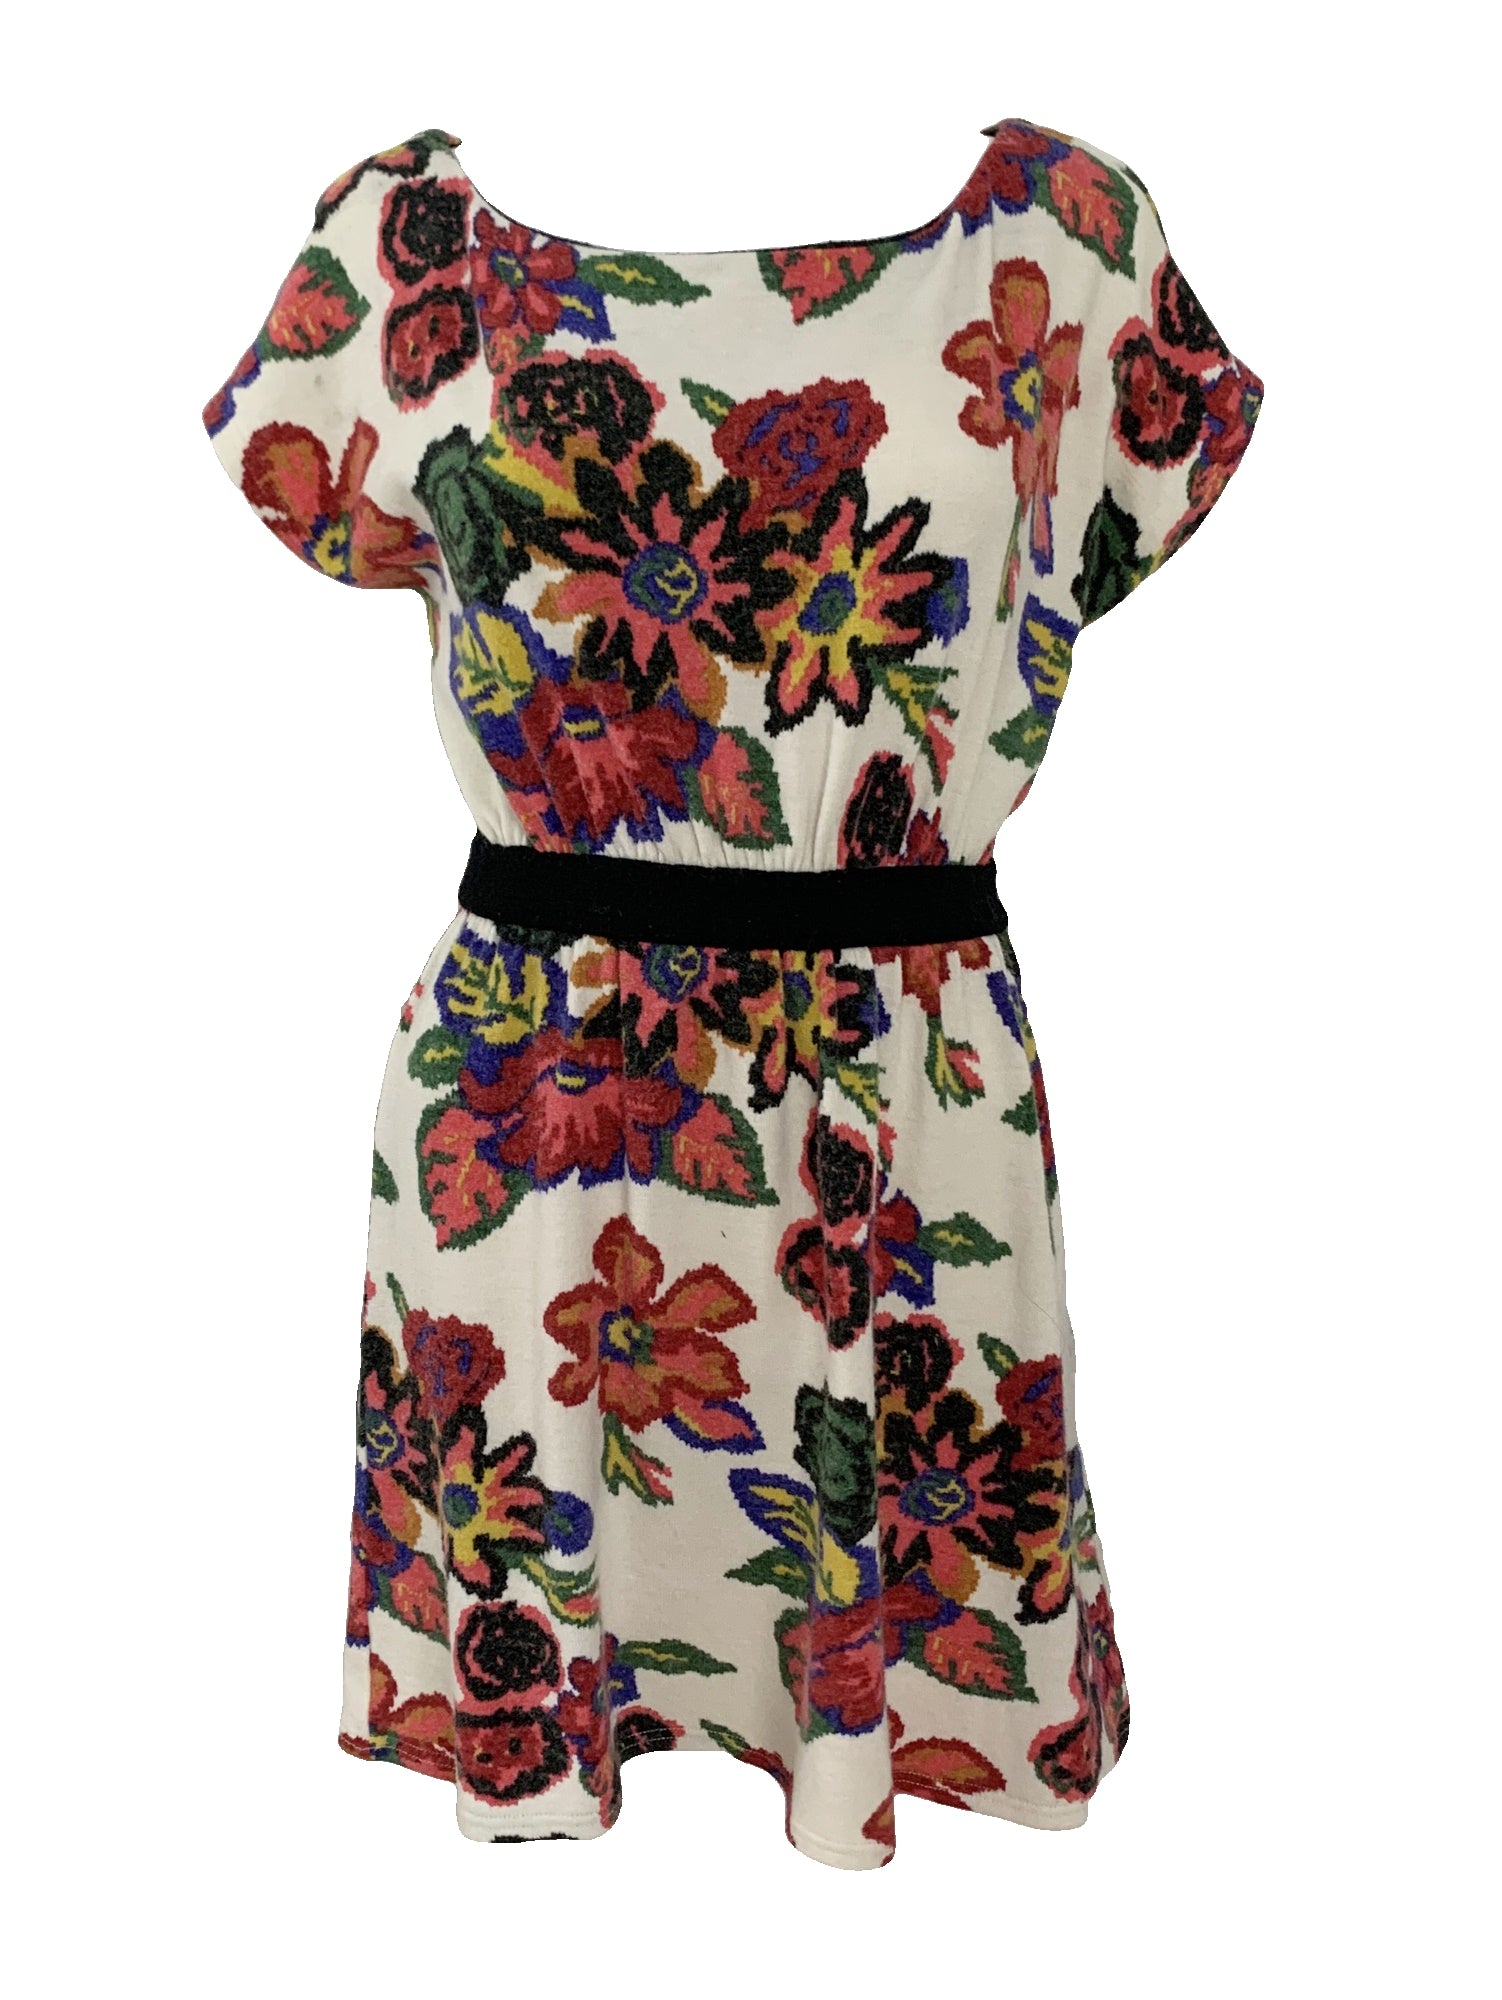 Terry Cloth Floral Dress Size Small